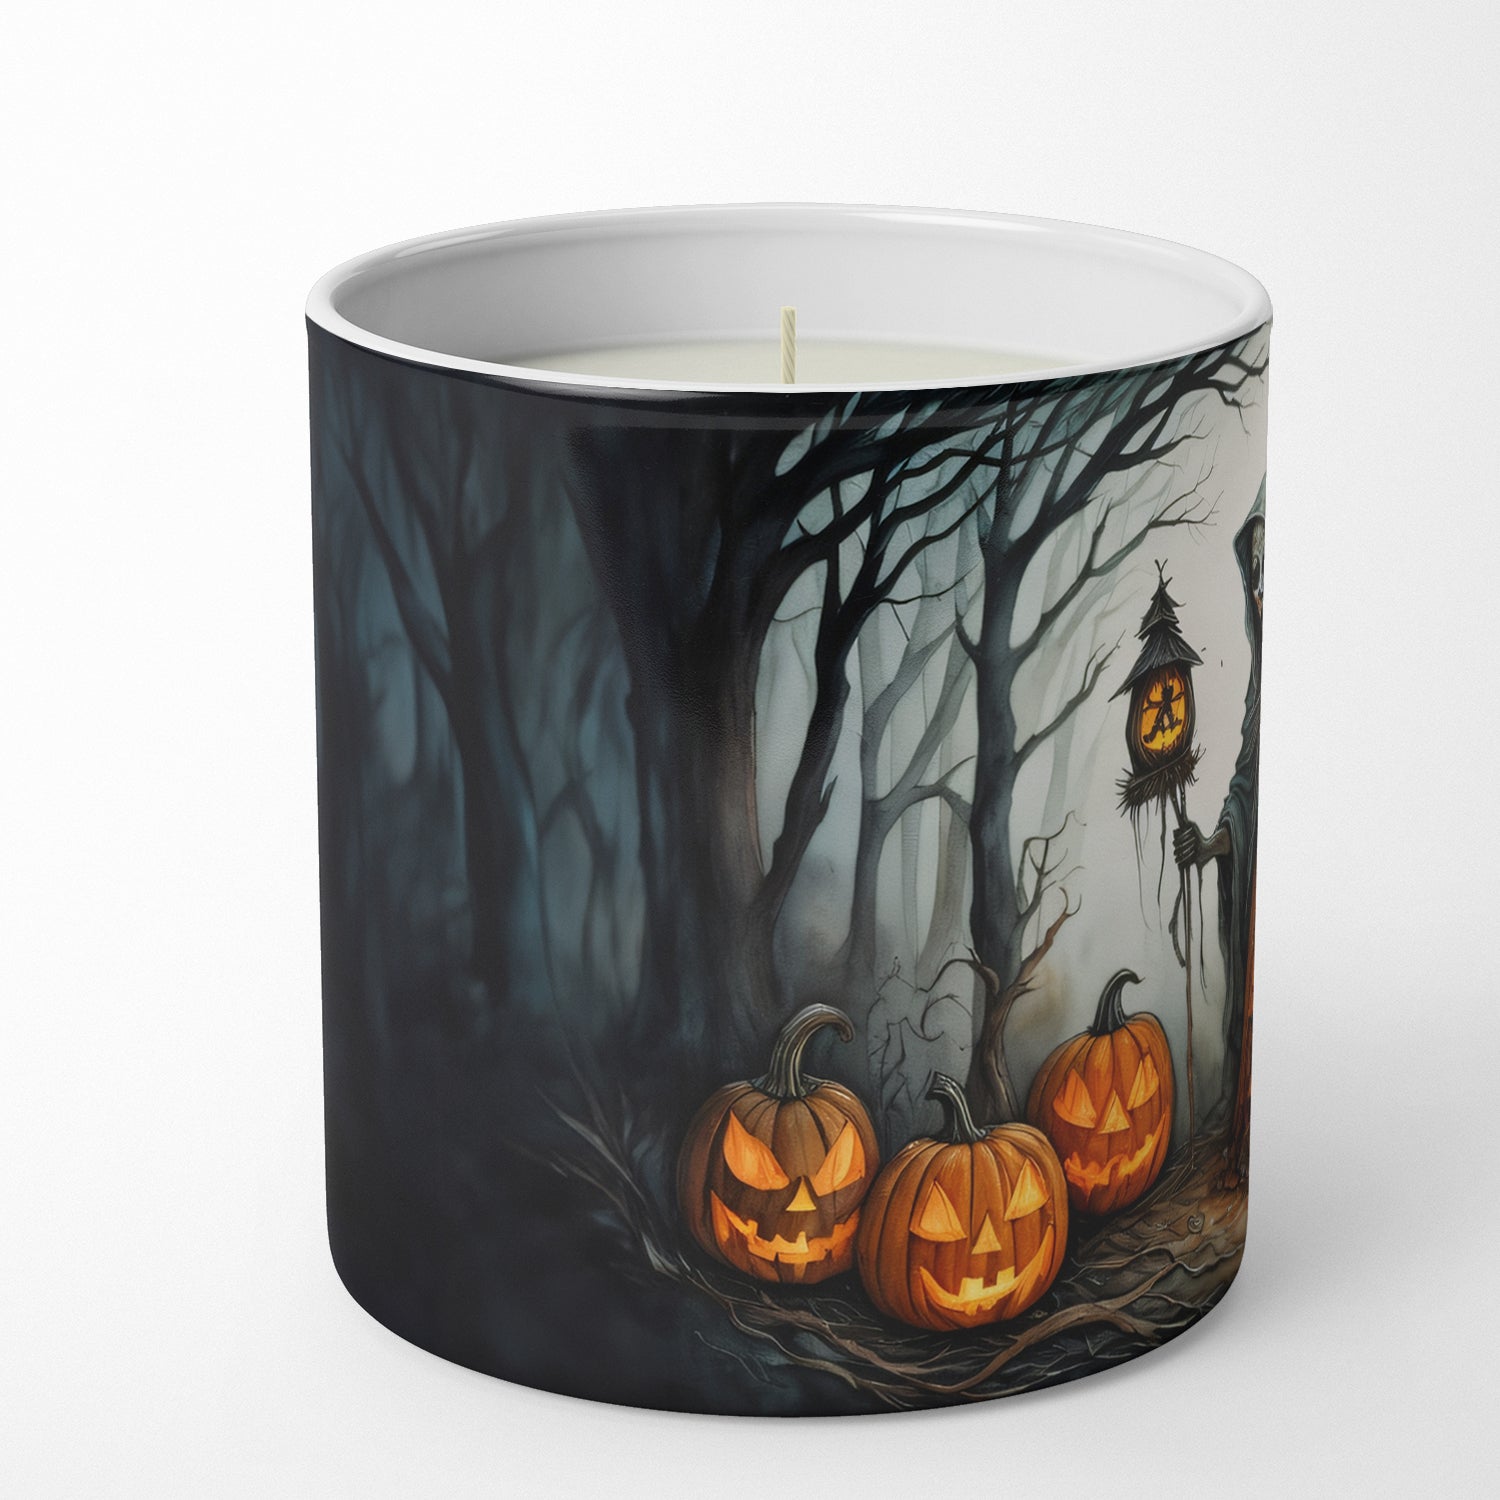 The Weeping Woman Spooky Halloween Decorative Soy Candle